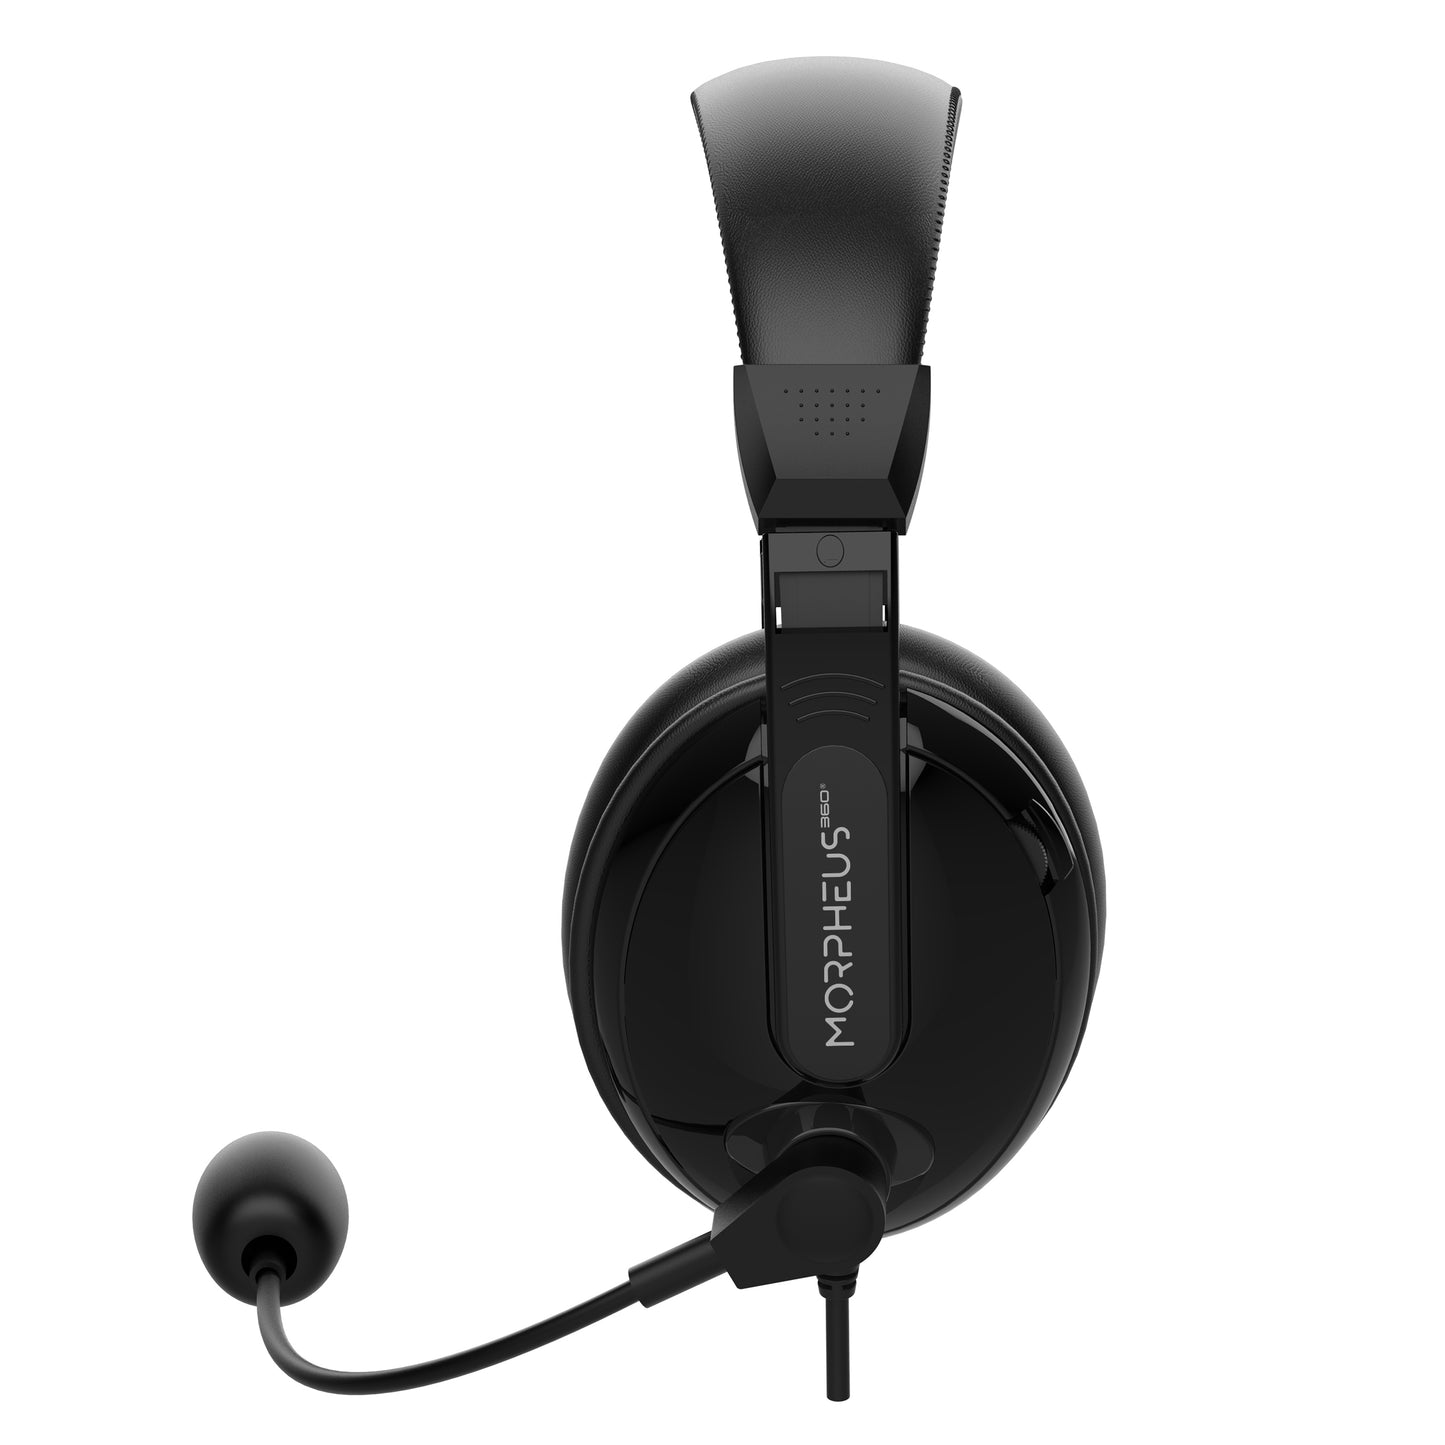 Left profile image of the Deluxe MM Headset with Boom Microphone.